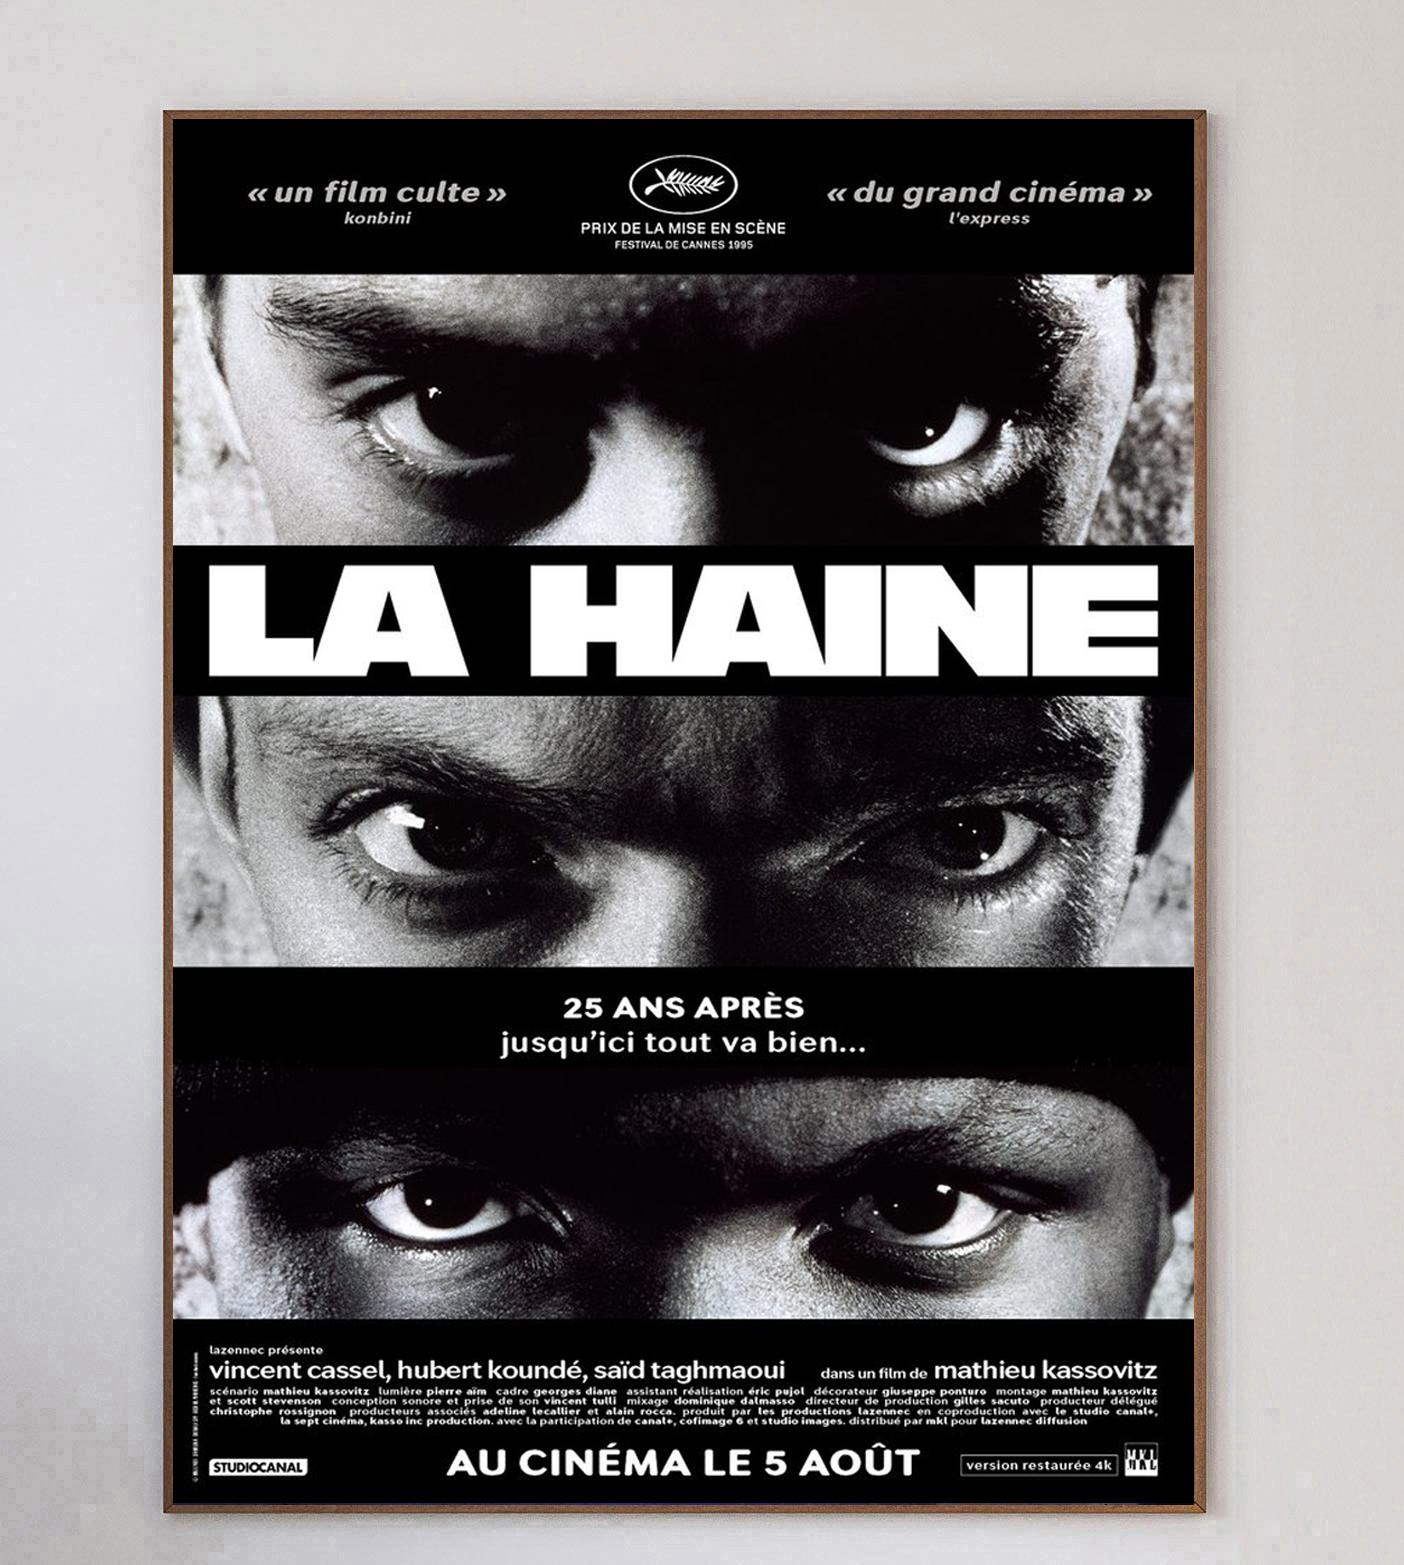 Released in 1995, Mathieu Kassovitz's classic 